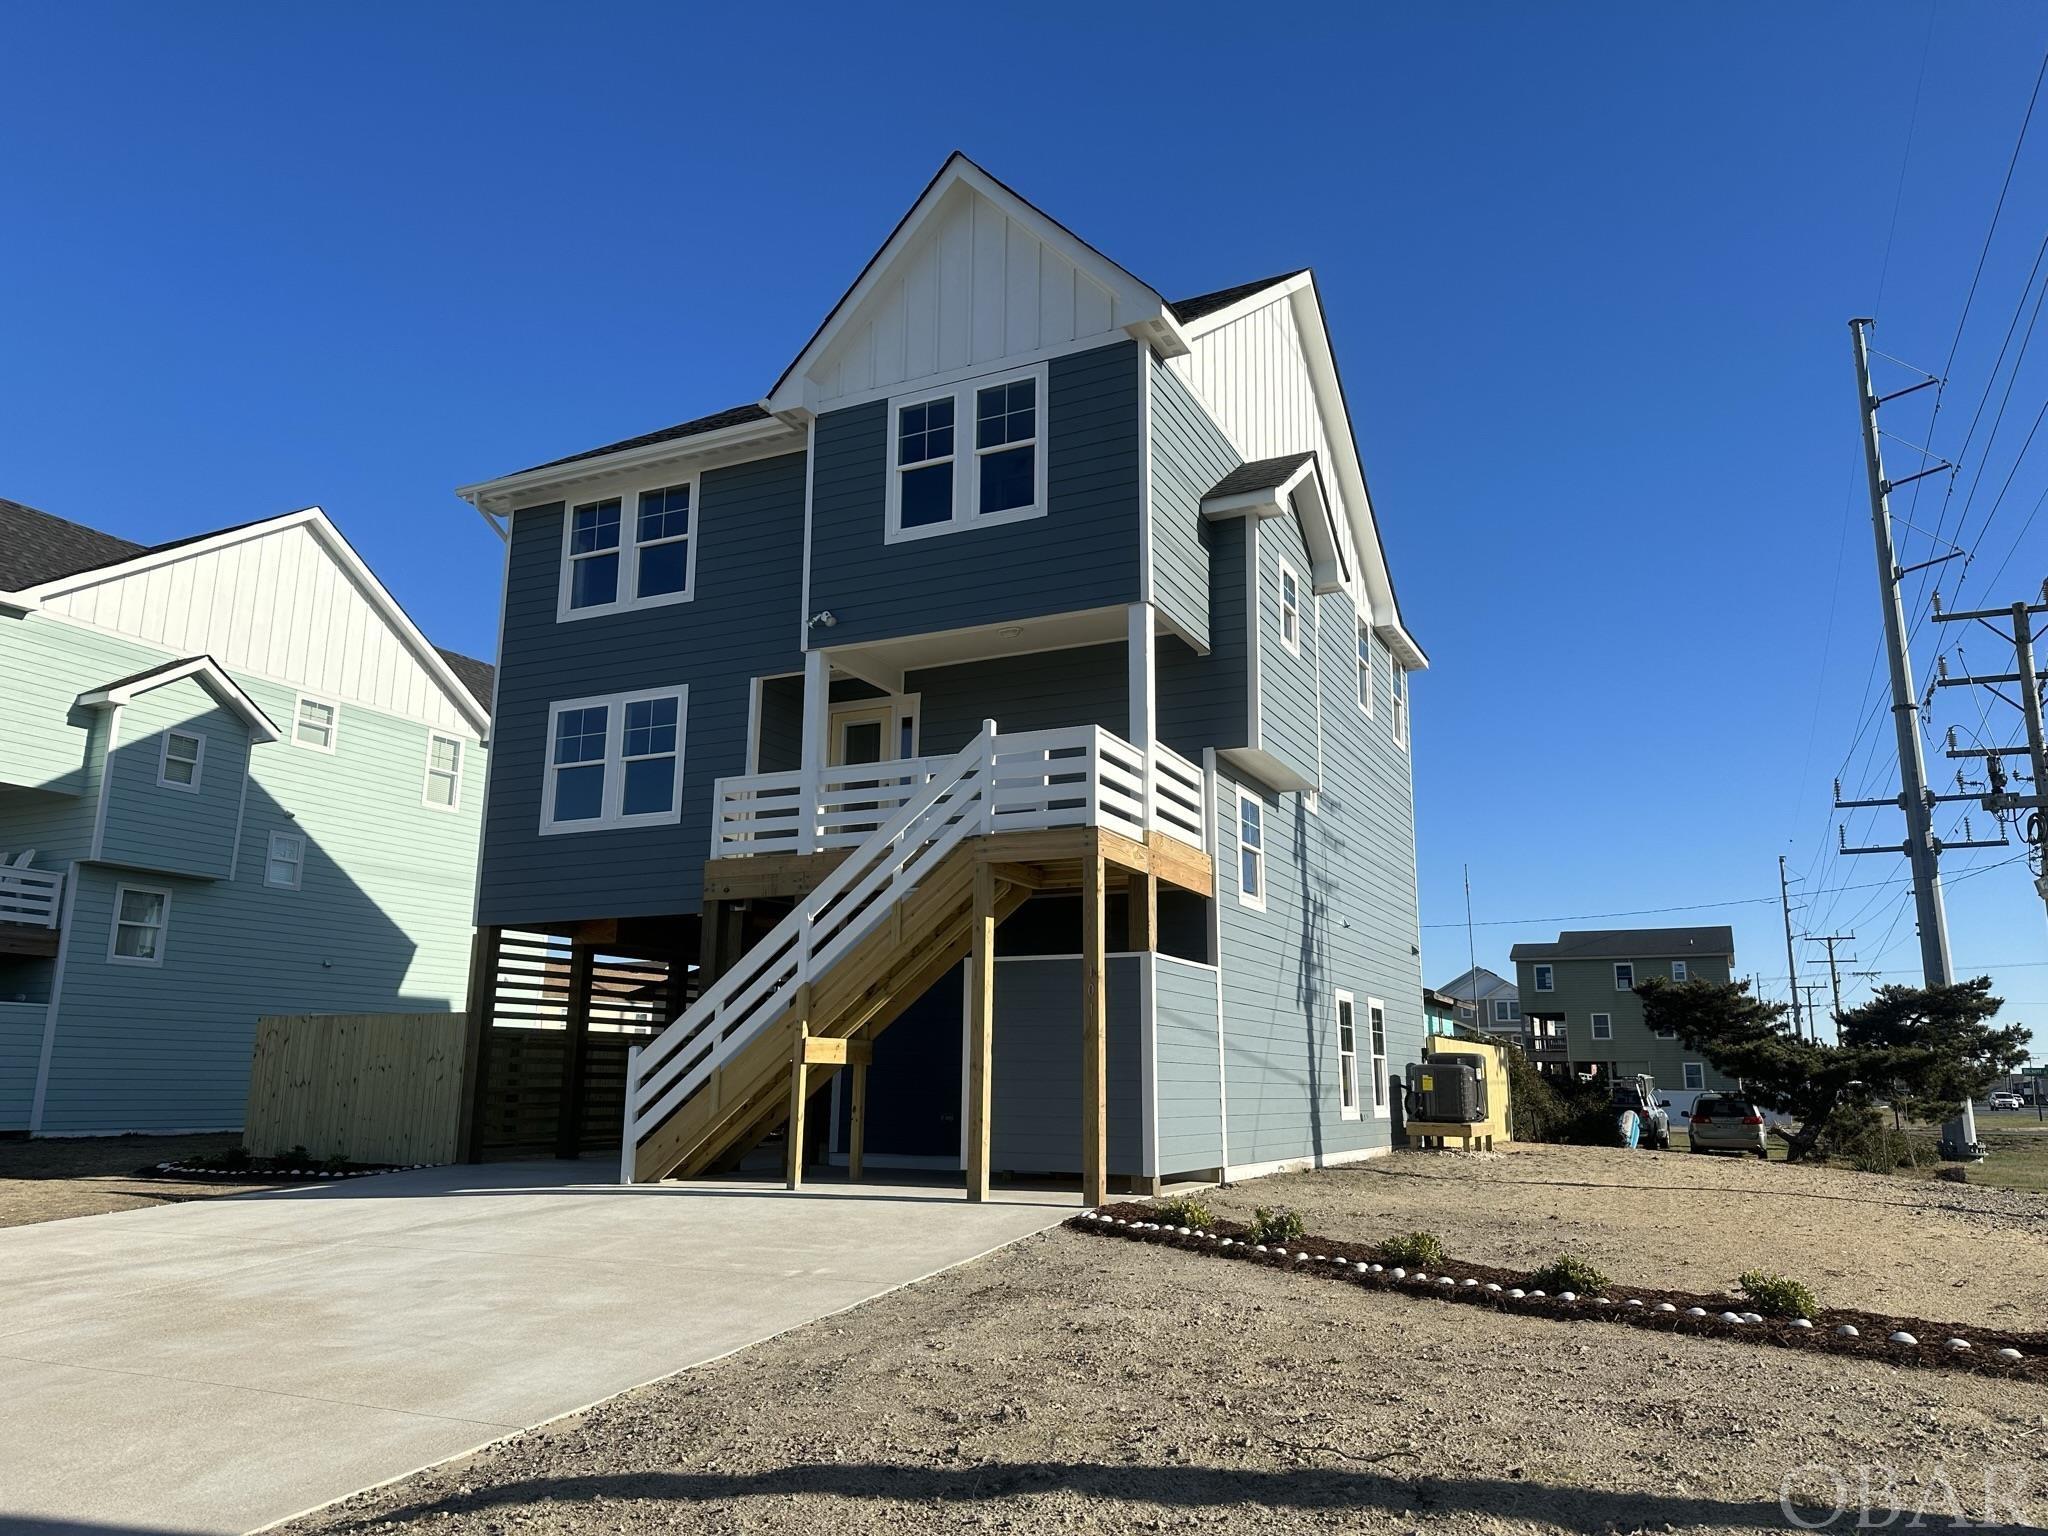 Rare opportunity!...Act quickly on this to be built brand new construction 2023 custom home built by Lenz Homes!  Located in a prime location just two blocks to the Avalon Pier and Awful Arthur’s!...and just 1000’ to the Random Street beach access!...Expect beautiful ocean/sunrise views from this home too!  Flood Zone “X”….average ground elevation 8+ feet!  This home will be carefully crafted using some of the best techniques and materials…vinyl Pella windows, LP Smart Siding, granite and quarts counter tops, GE Stainless Appliances, Craftsman trim and so many other upgrades! Enjoy the 12' X 24" private pool and 18’ X 14’ game room after a day at the beach. May 2023 completion date (or sooner).  Builder available to meet interested buyer clients.